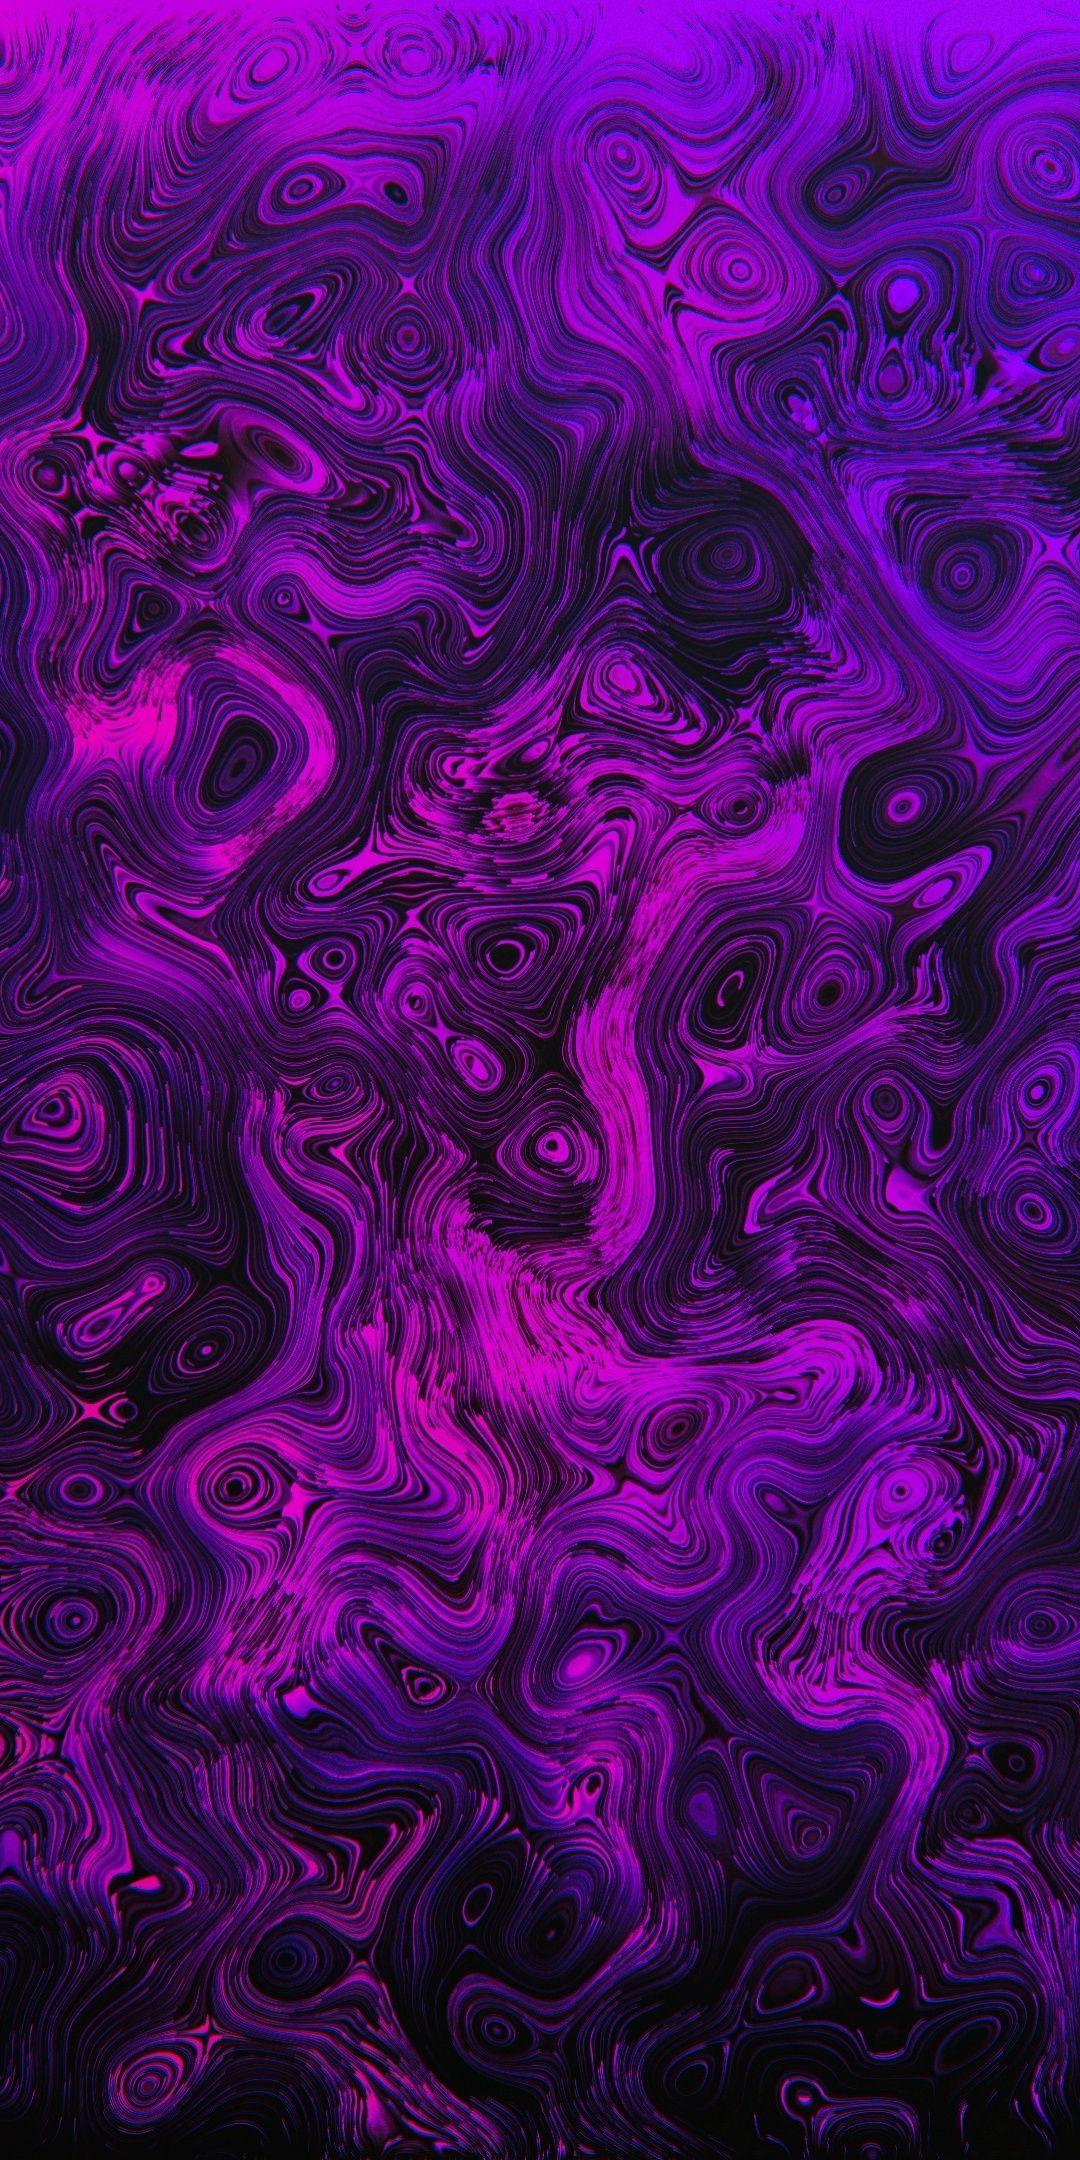 Trippy Purple Wallpaper - Cool Pink And Purple Backgrounds - HD Wallpaper 